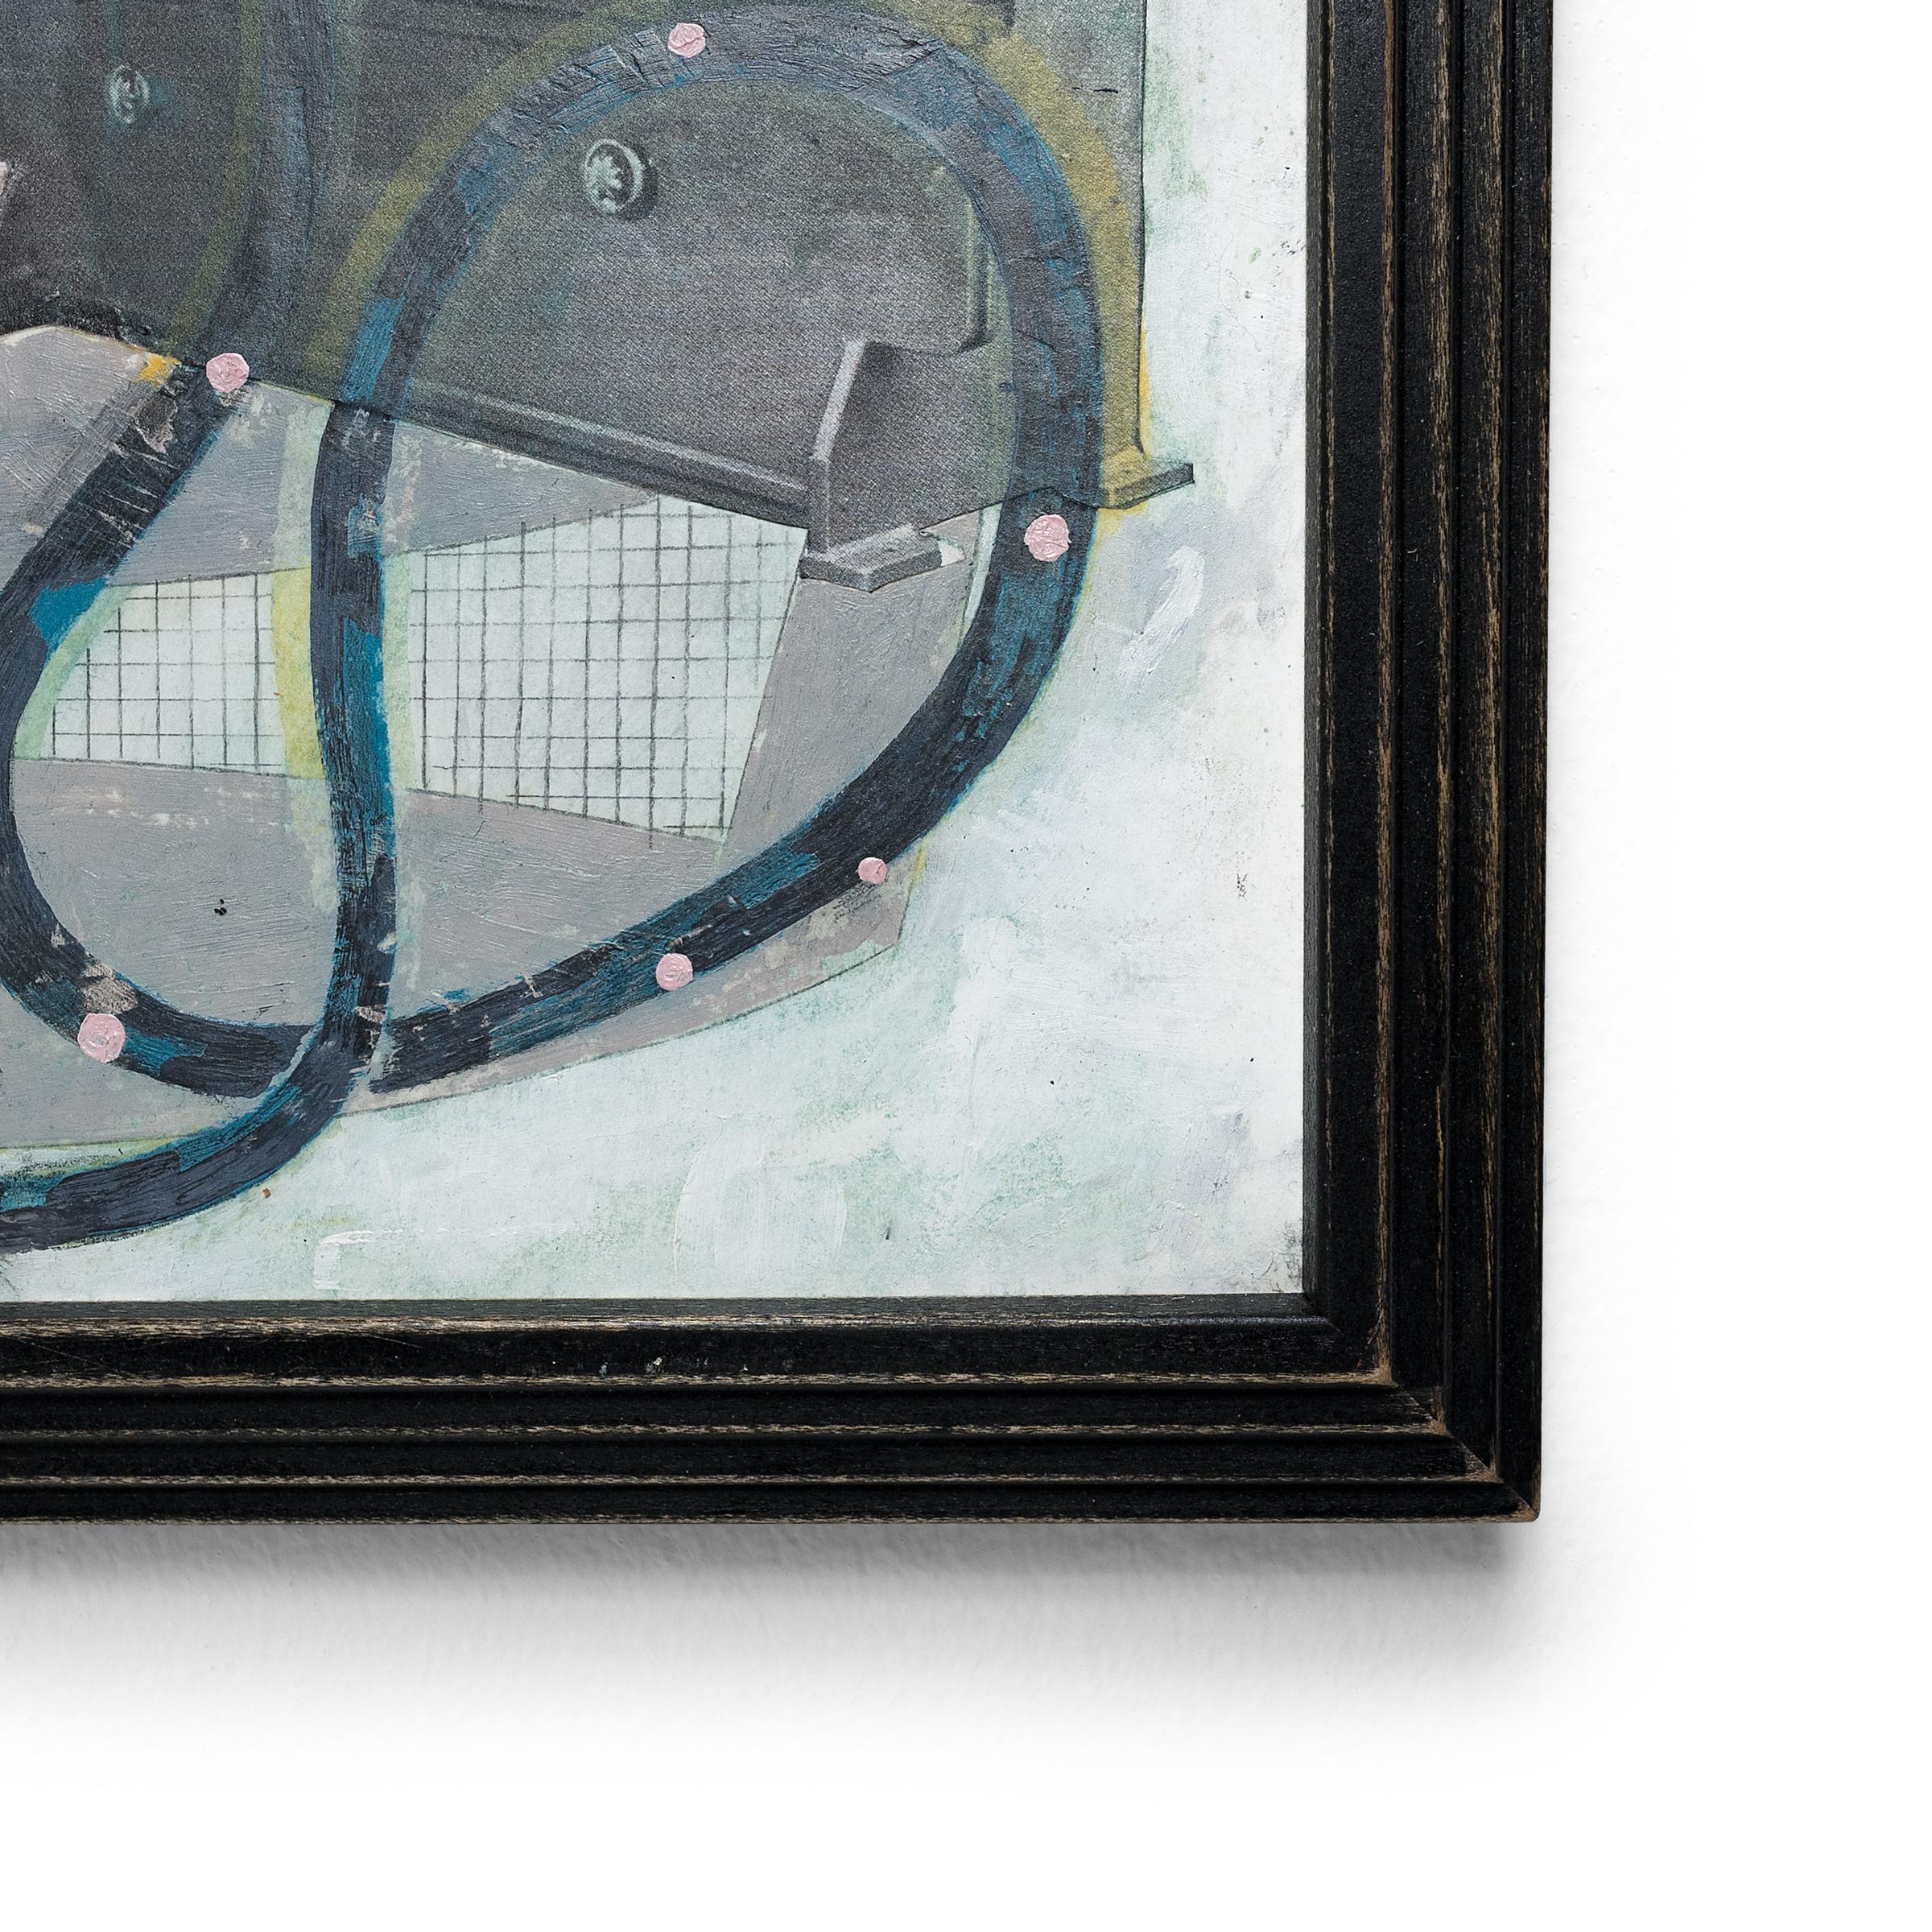 This abstract work by Chicago artist Patrick Fitzgerald is one of a series of “track paintings” that materialize the imagined tracks navigated by his miniature soap-box car sculptures. Inspired by slot-car racetracks, each painting depicts a